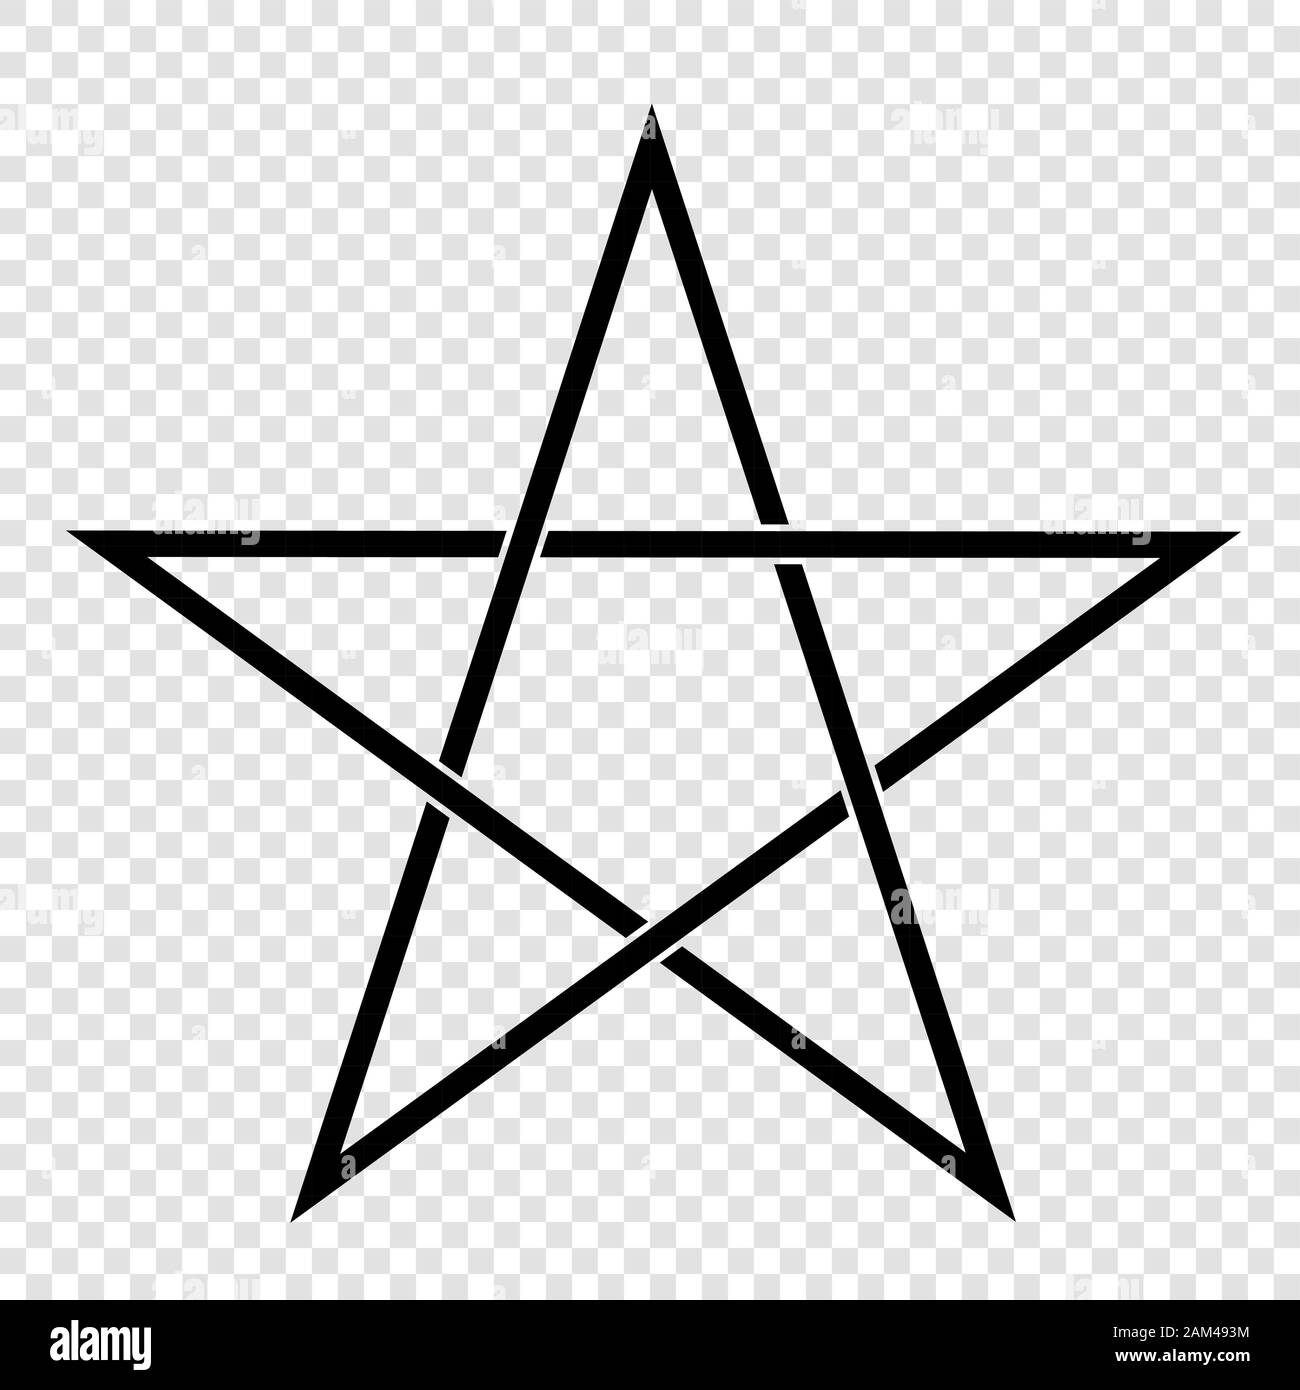 Illustration of a Pentagram, a five-pointed star. Esoteric or magic symbol of Occultism and Witchcraft. Isolated on transparent background - vector Stock Vector